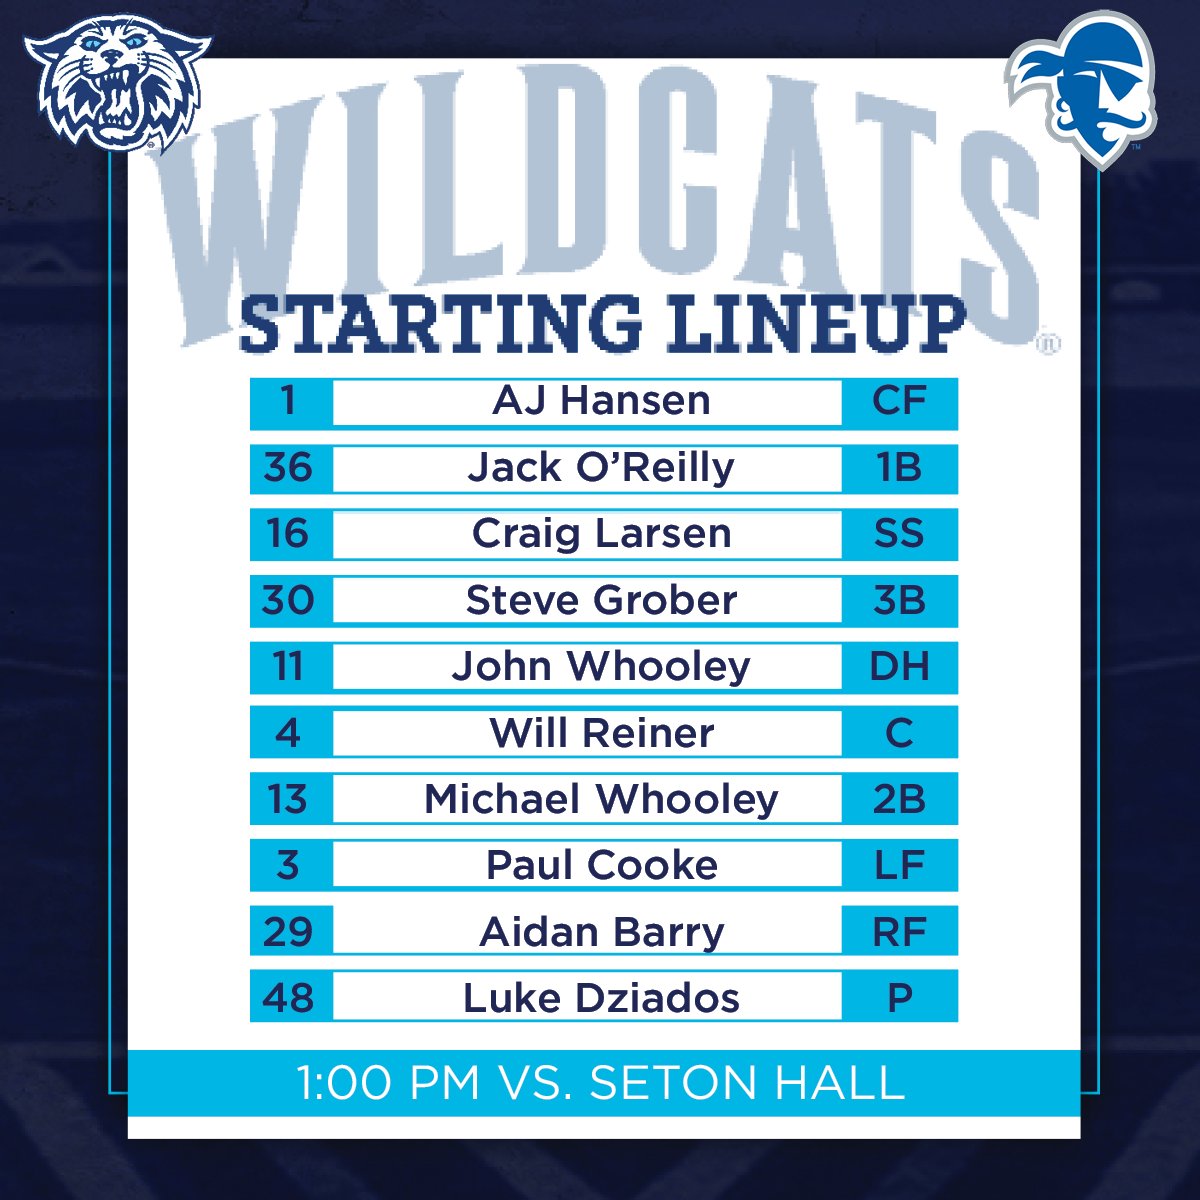 ⚾️𝙎𝙩𝙖𝙧𝙩𝙞𝙣𝙜 𝙇𝙞𝙣𝙚𝙪𝙥! 
Round two between the Wildcats and the Pirates in their BIG EAST three-game series! Here is today's starting lineup!  #GoNova #VUBaseball #GoCats

🖥️: bitly.ws/AYyZ
📊: bitly.ws/EVJI